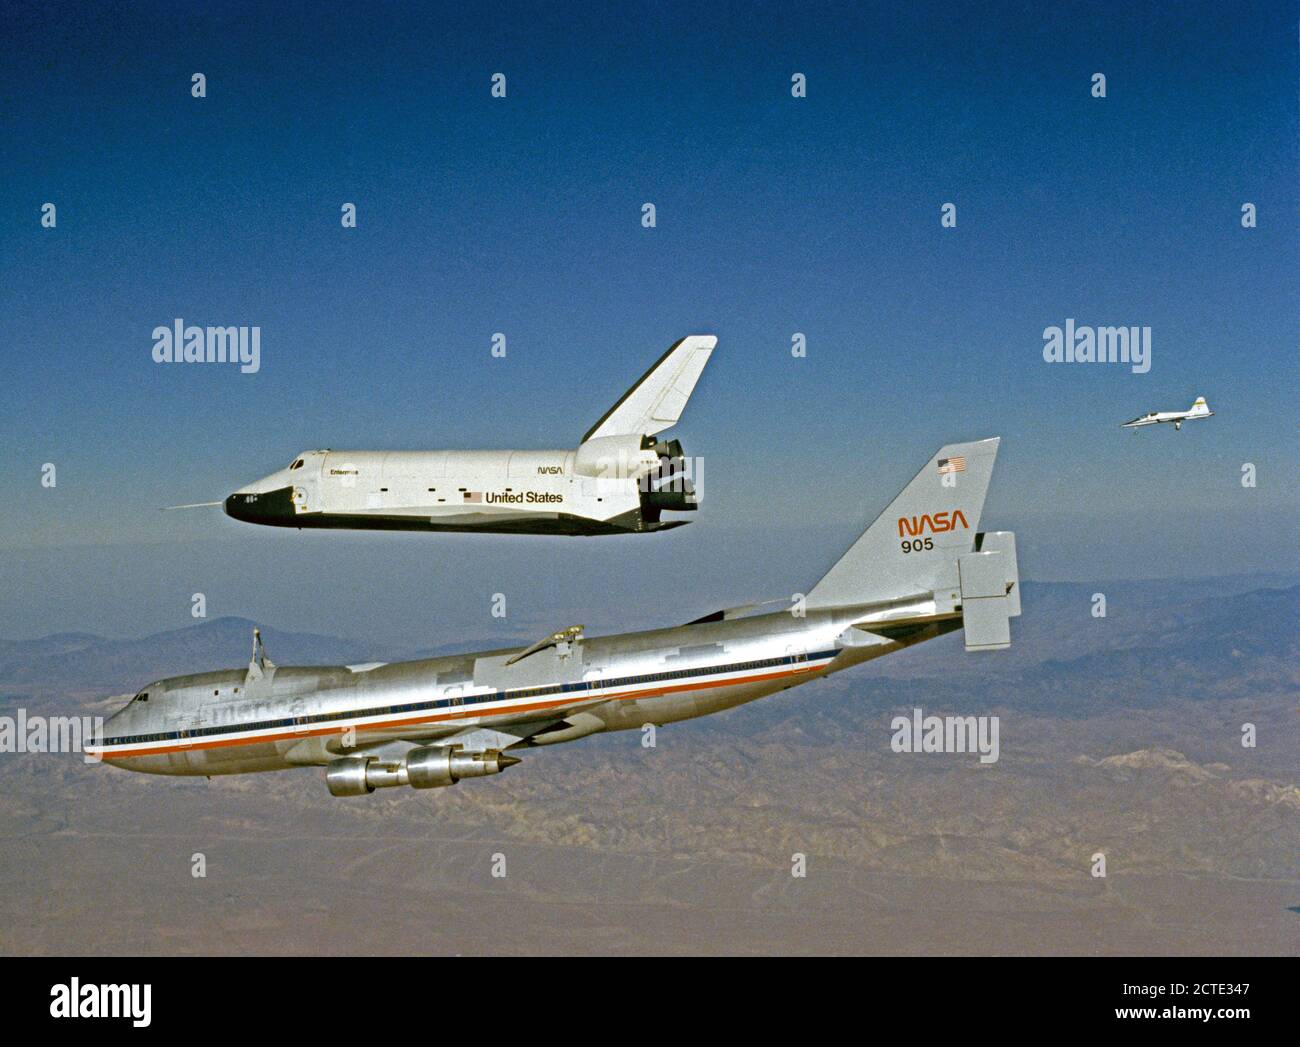 (12 Oct. 1977) --- The Orbiter 101 'Enterprise' separates from the NASA 747 carrier aircraft to begin its first 'tailcone-off' unpowered flight over desert and mountains of Southern California. A T-38 chase plane follows in right background. This was the fourth in a series of five piloted free flights. Stock Photo